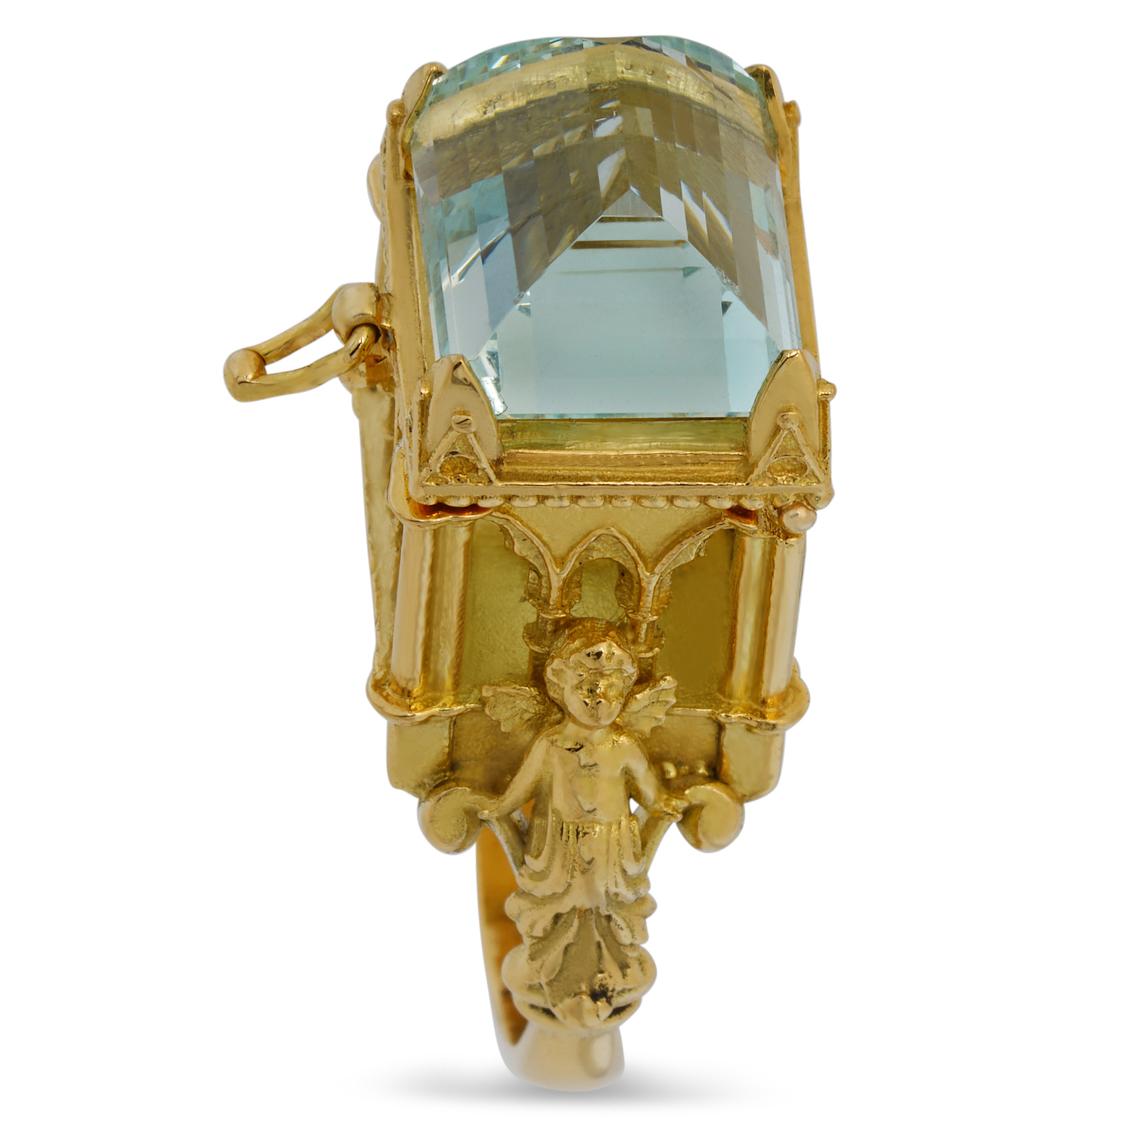 Galerie des Glaces Cathedral Poison Ring in 18 Karat Yellow Gold with Aquamarine 1